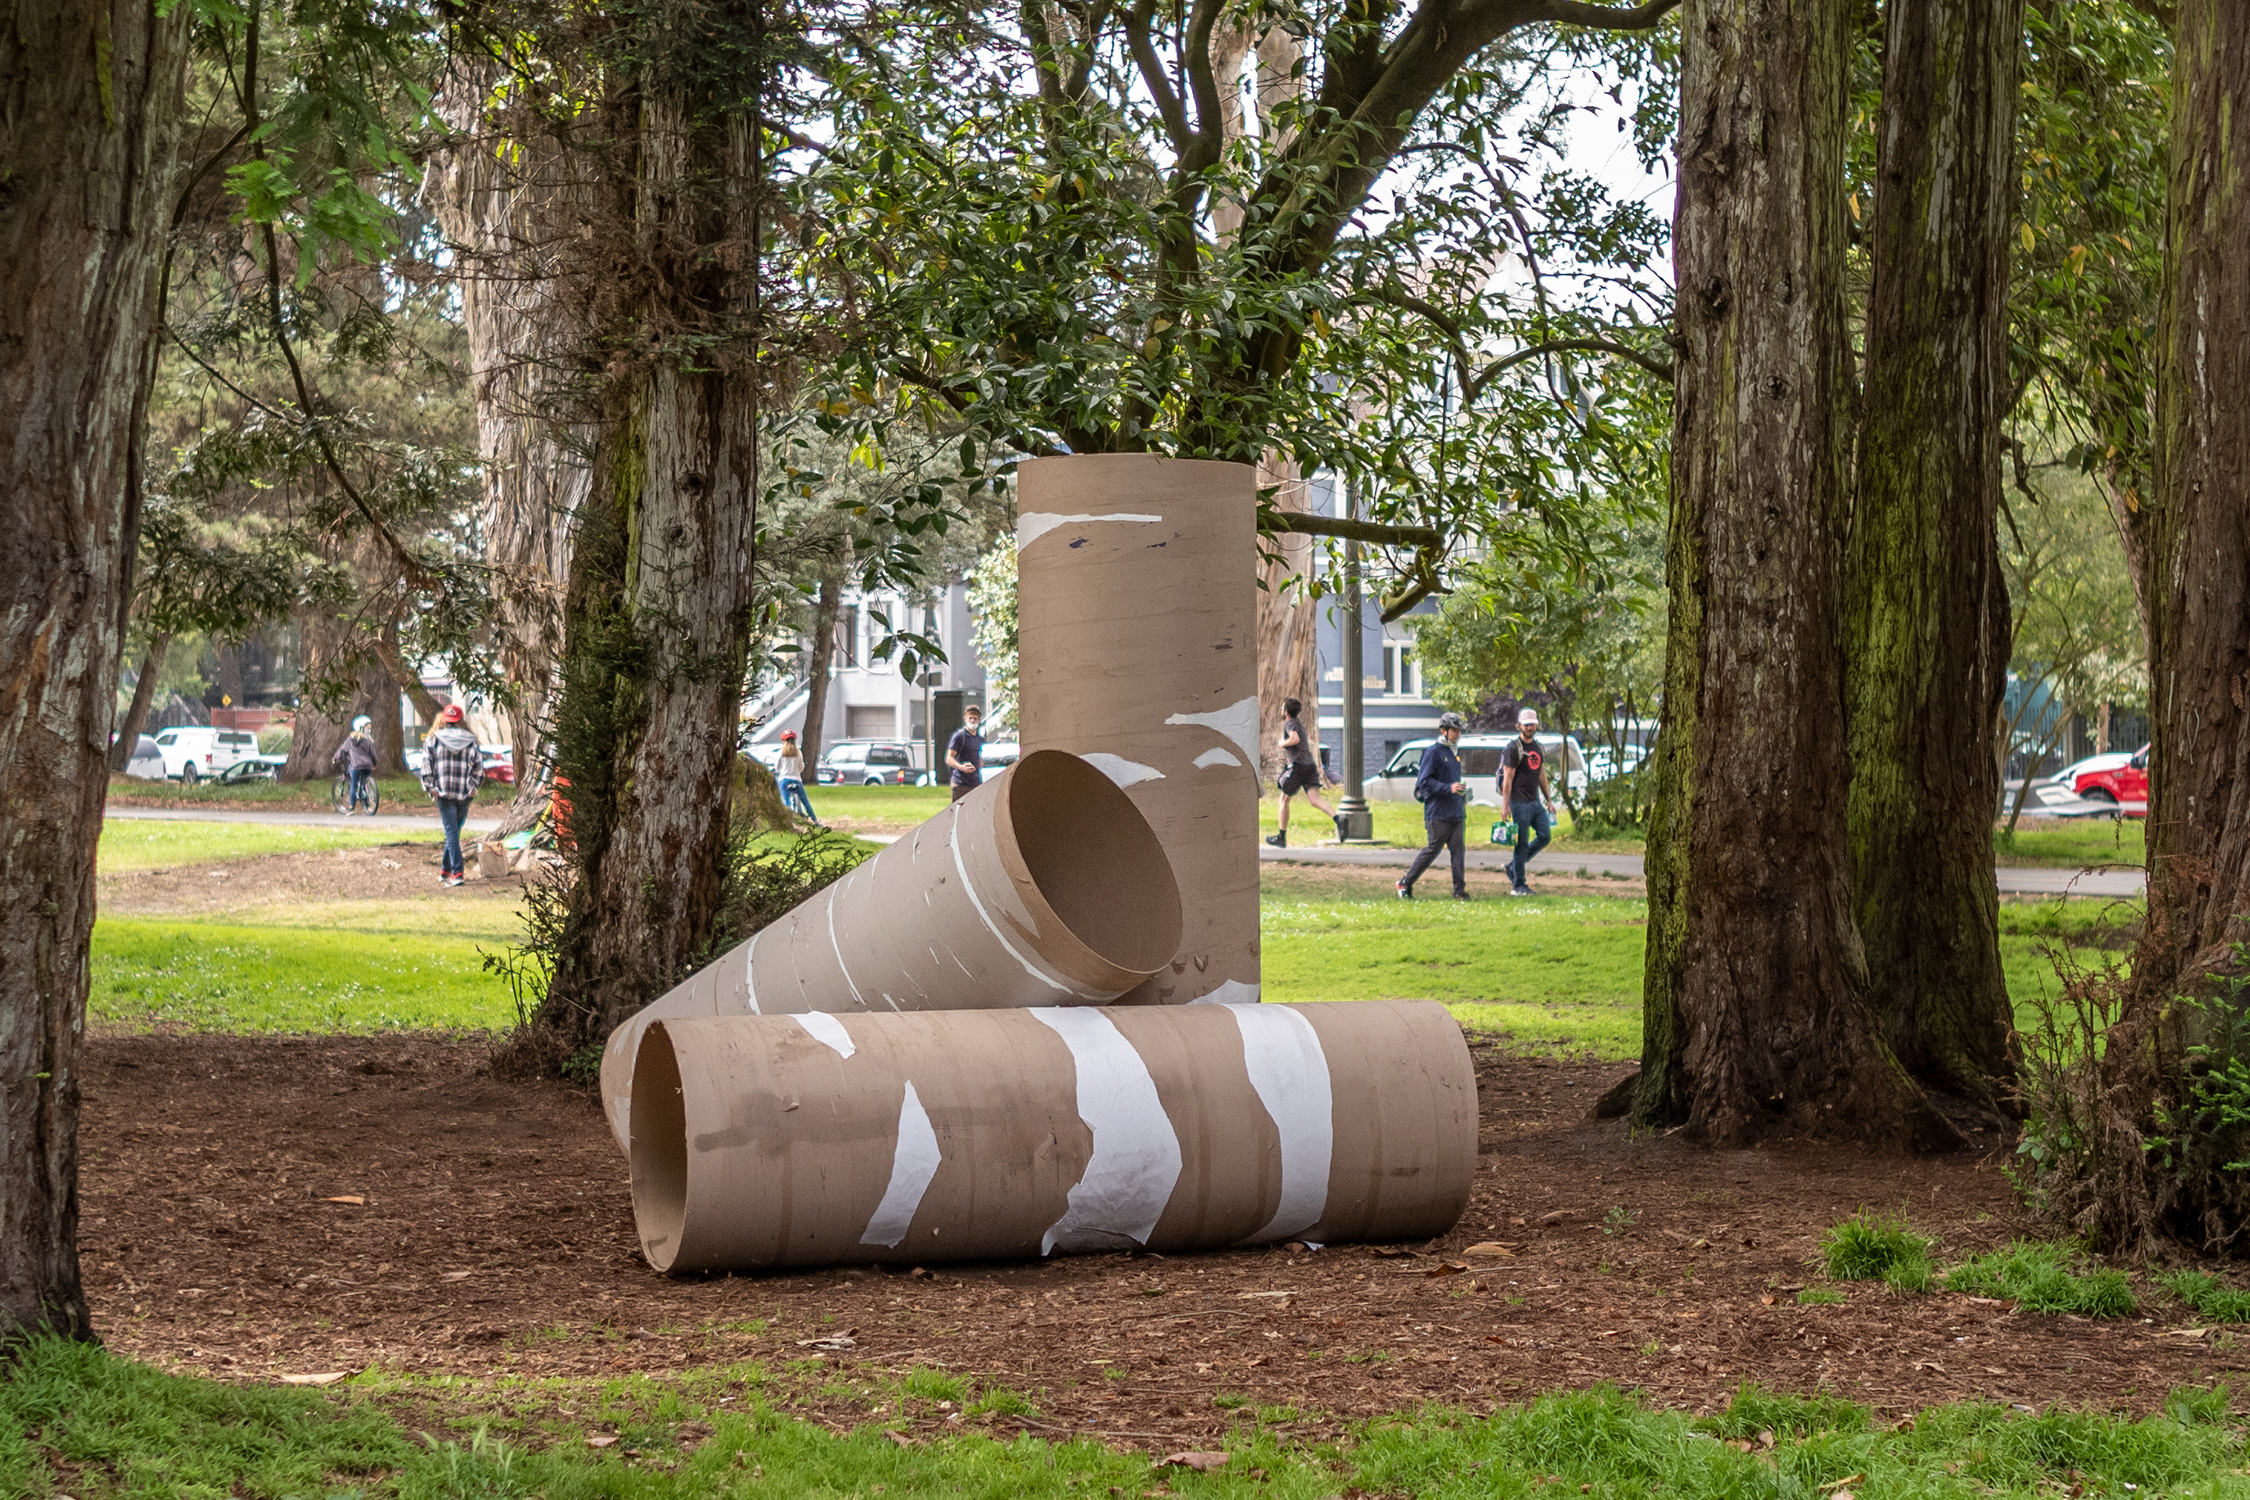 Gabe Ferreira: We’re out — Conceptual sculpture standing at San Francisco’s Panhandle park.